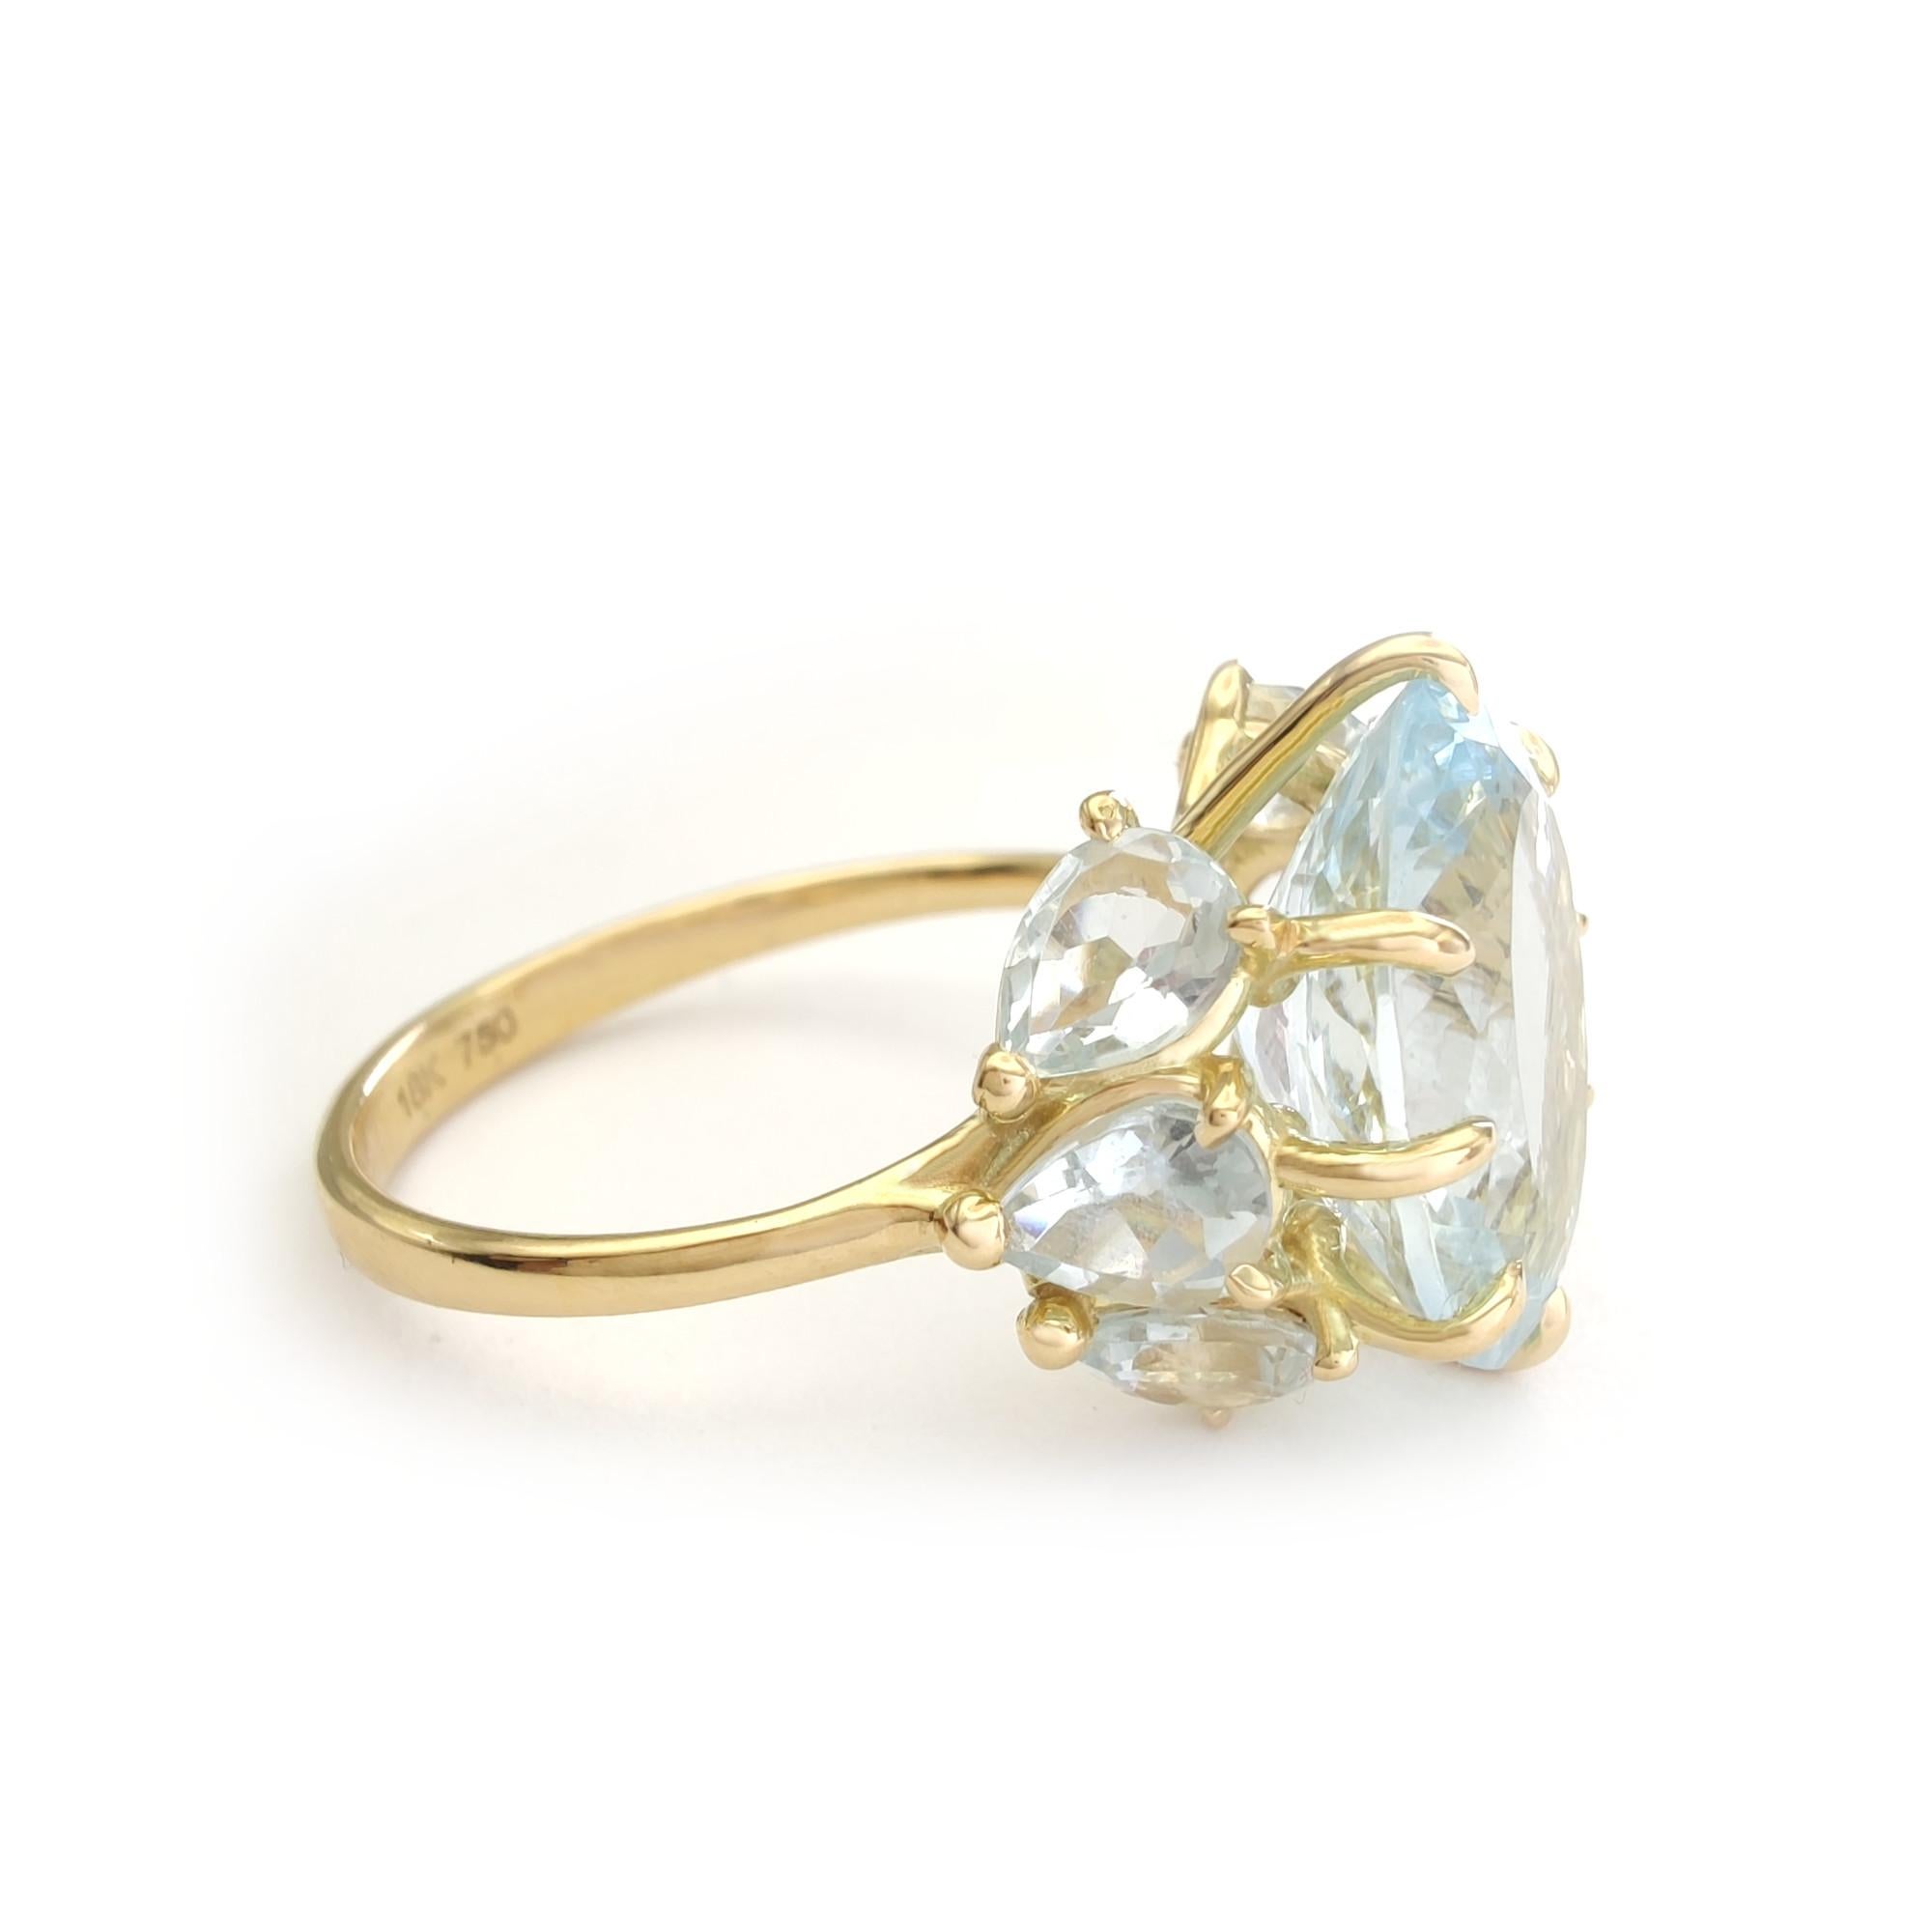 Handmade 4.8 Carat Oval Aquamarine Cocktail Ring in 18K Yellow Gold For Sale 3